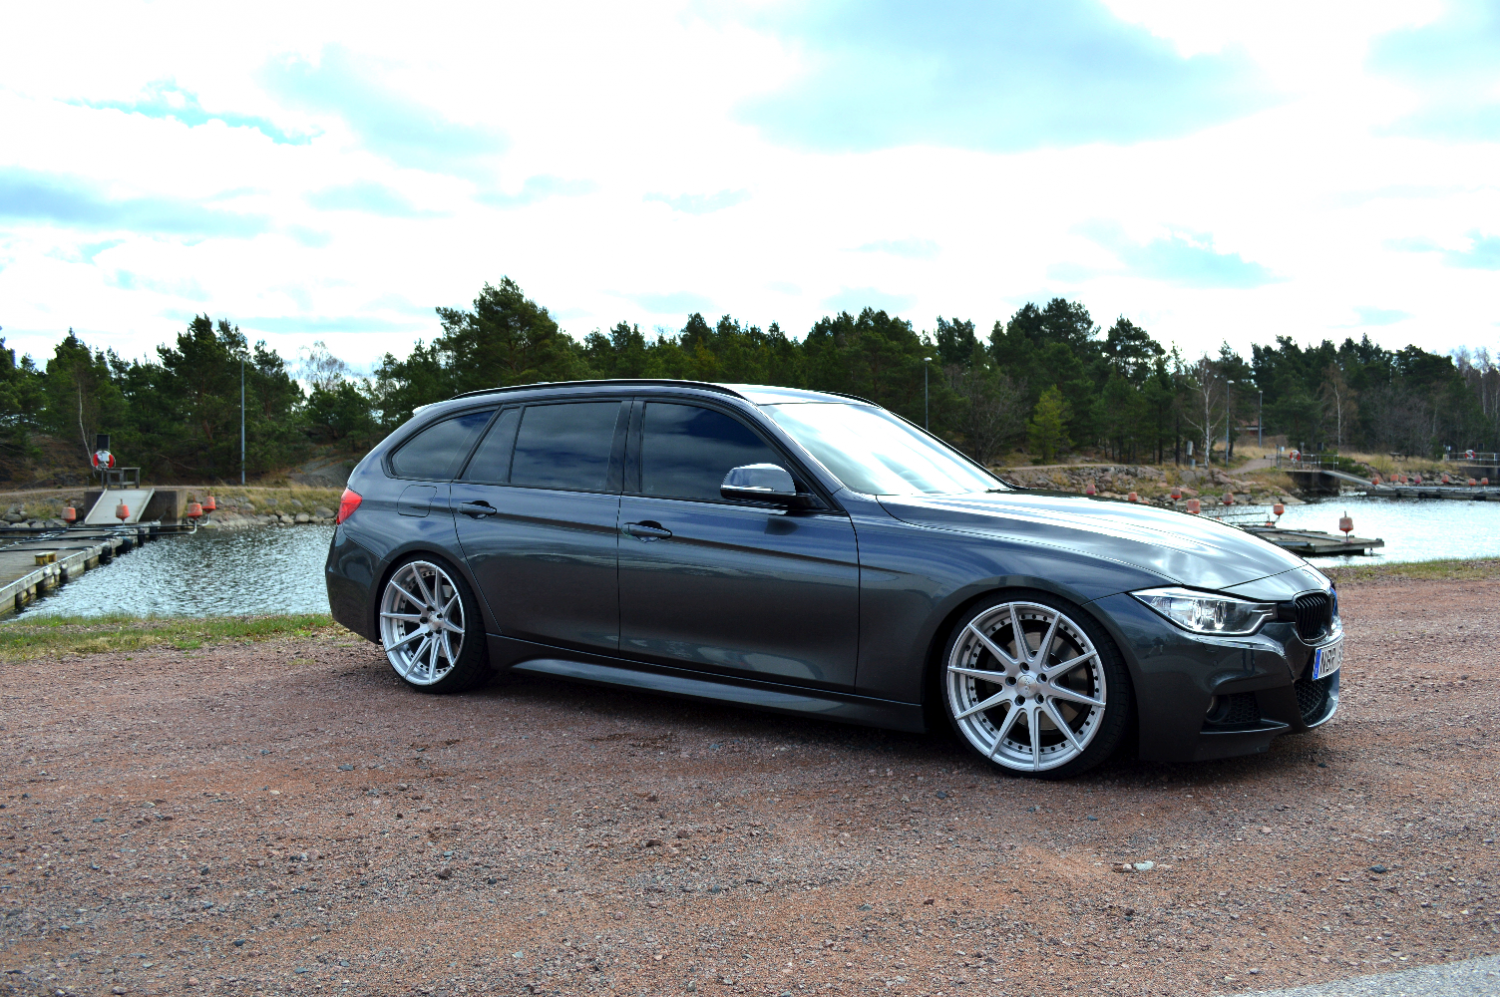 Coilovers BMW F31 4/6 Cyl (11~upp) - Street Performance